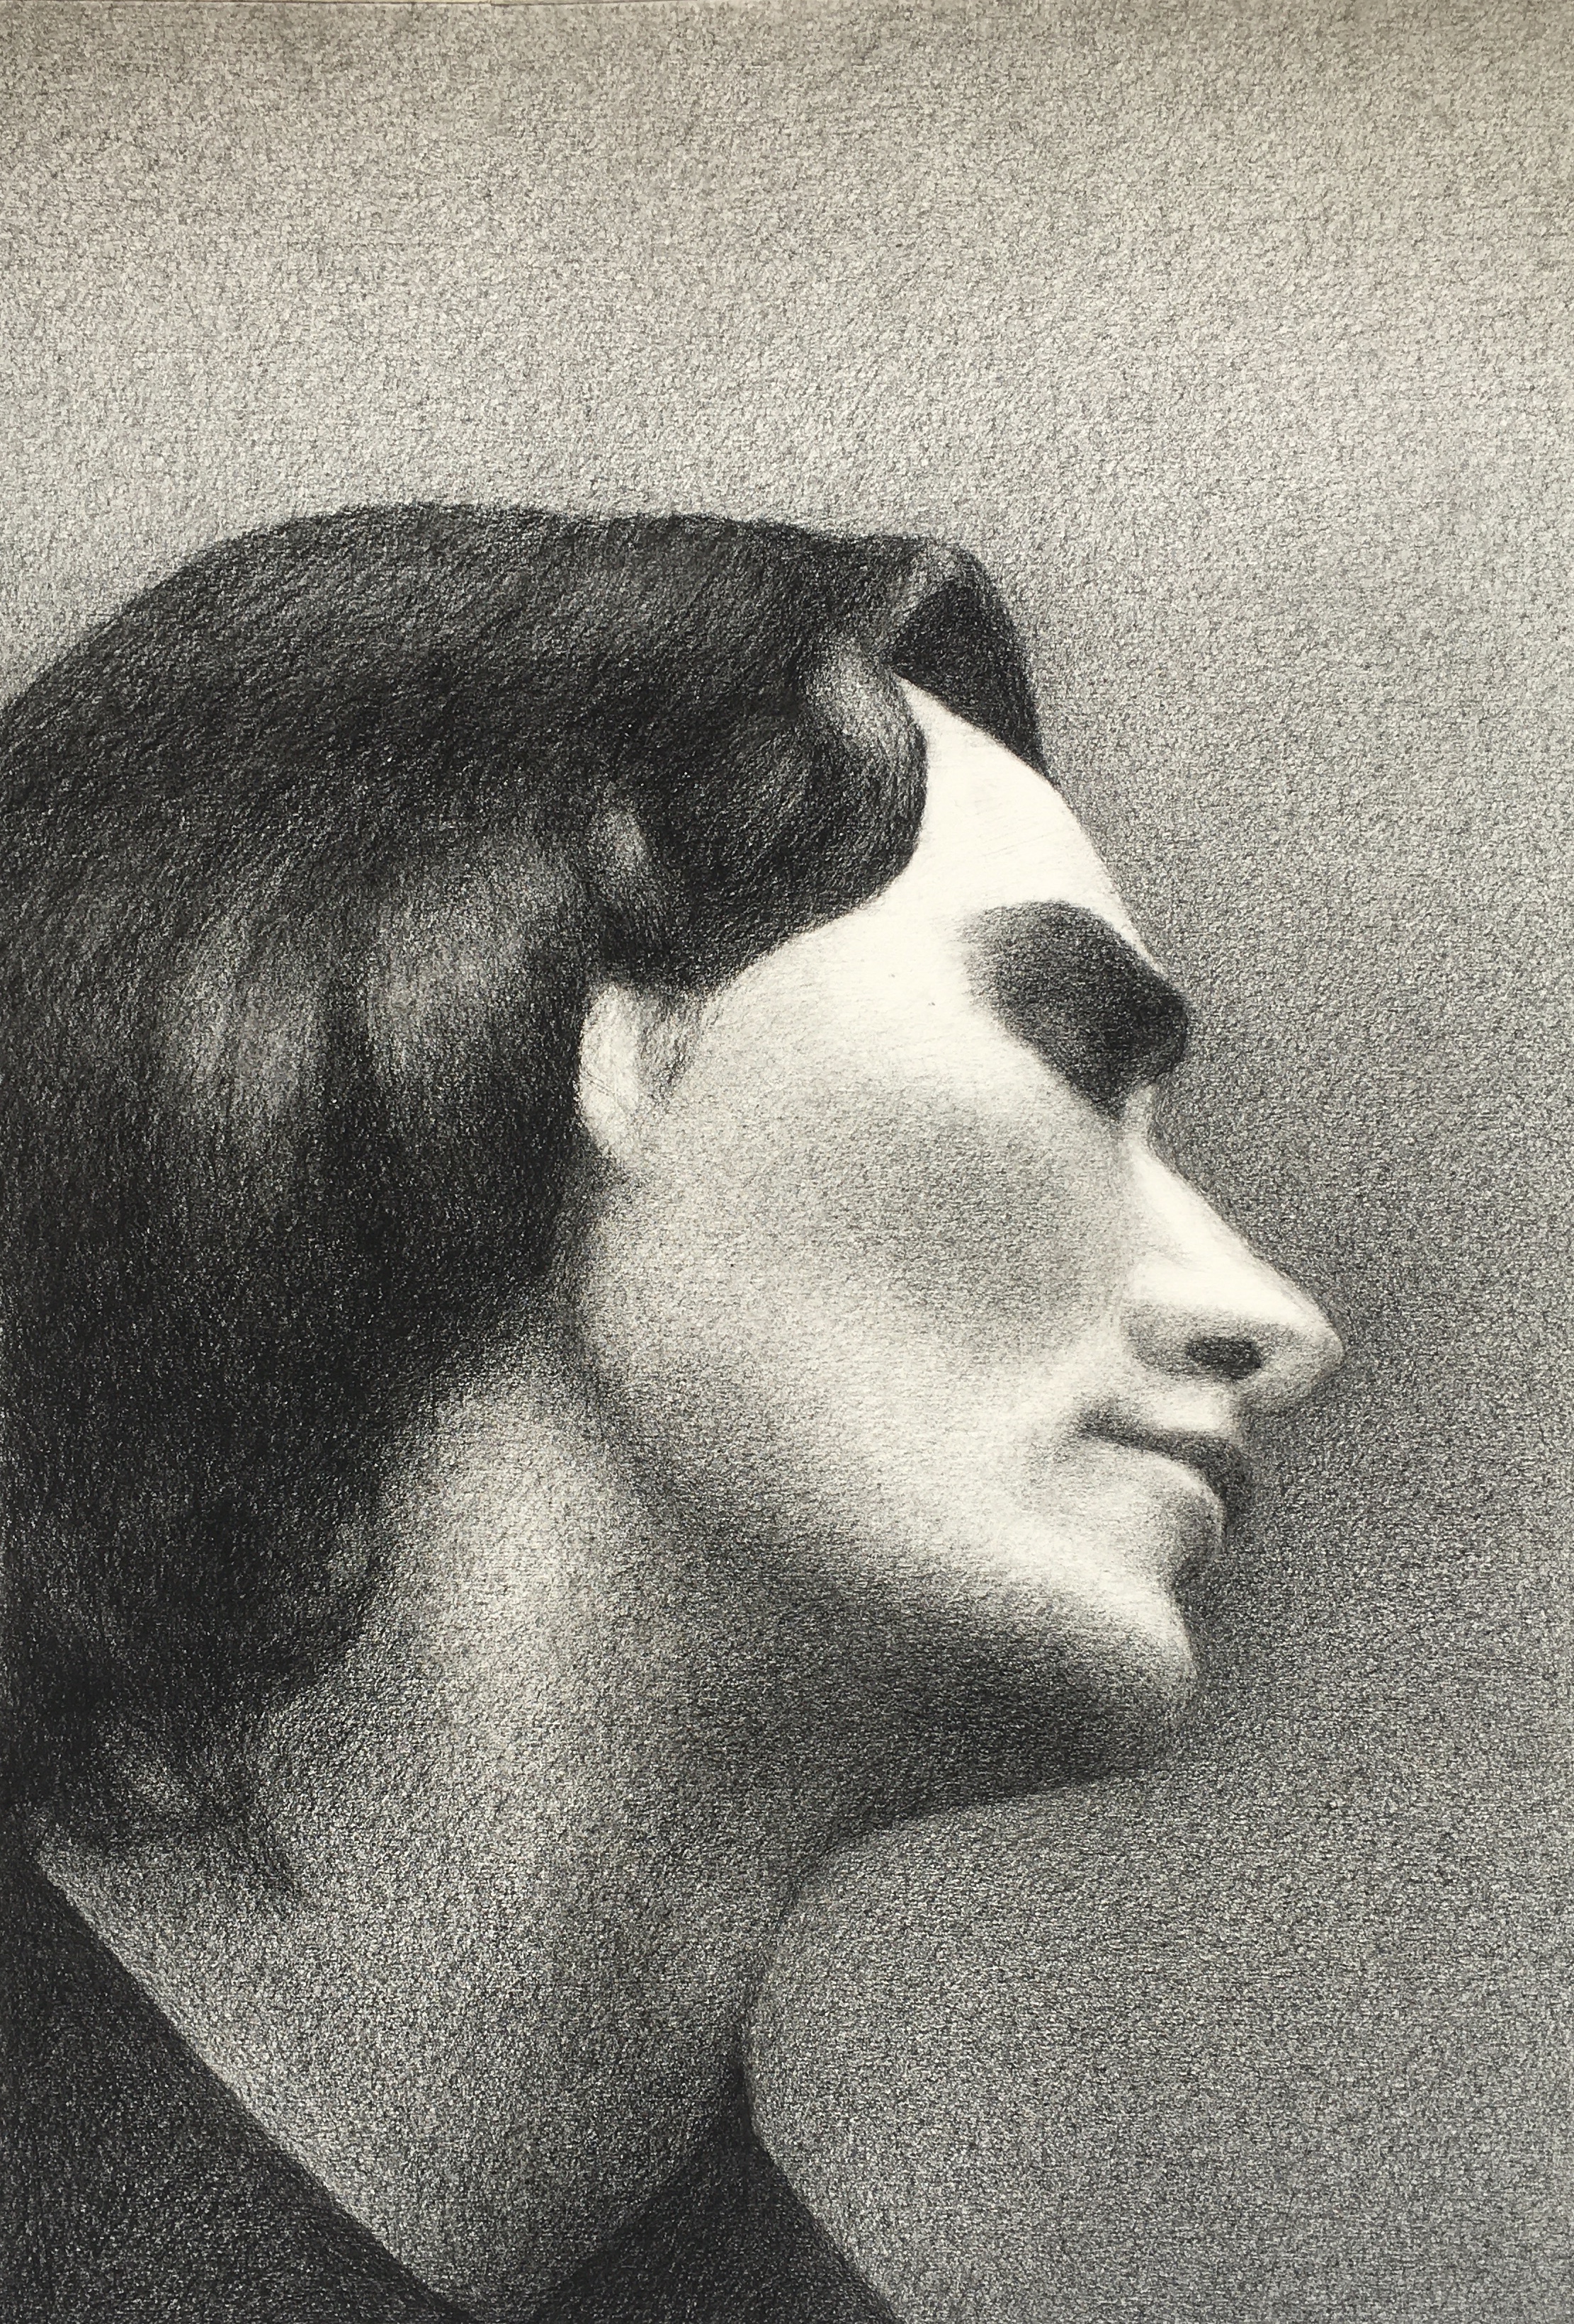 Black chalk drawings by Cecilie Nyman // GALLERY NYMAN